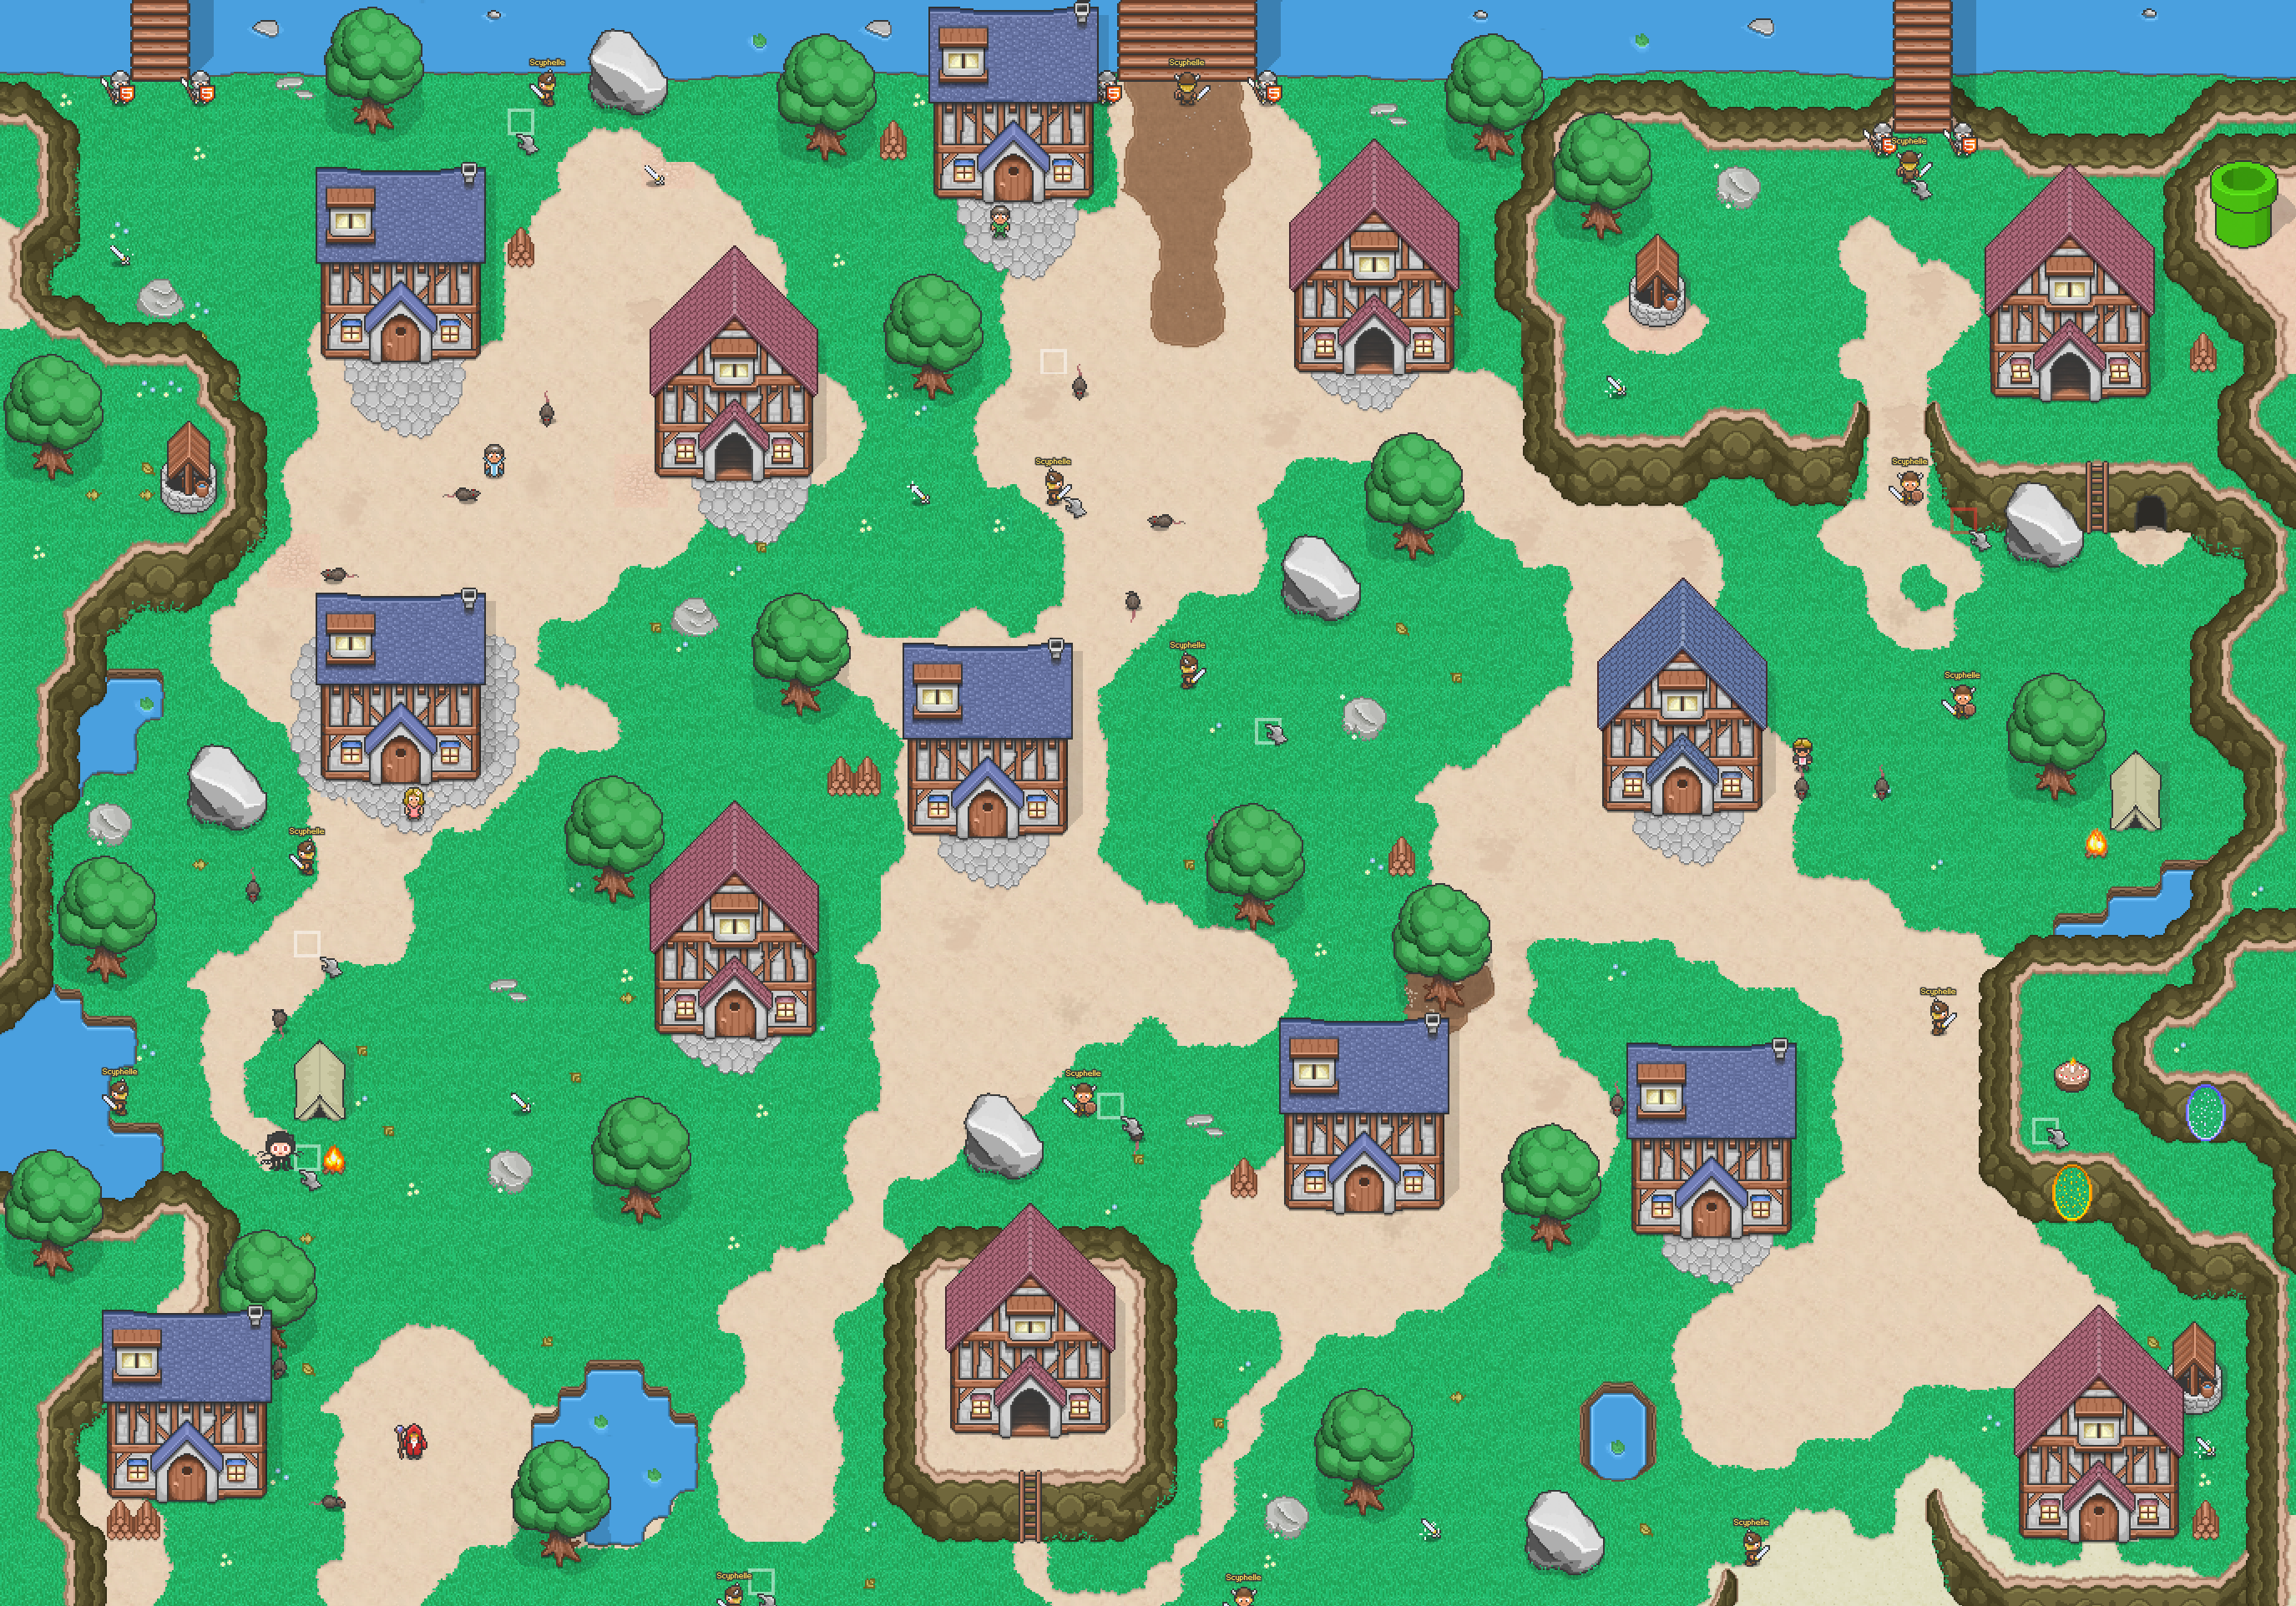 browserquest 2 map